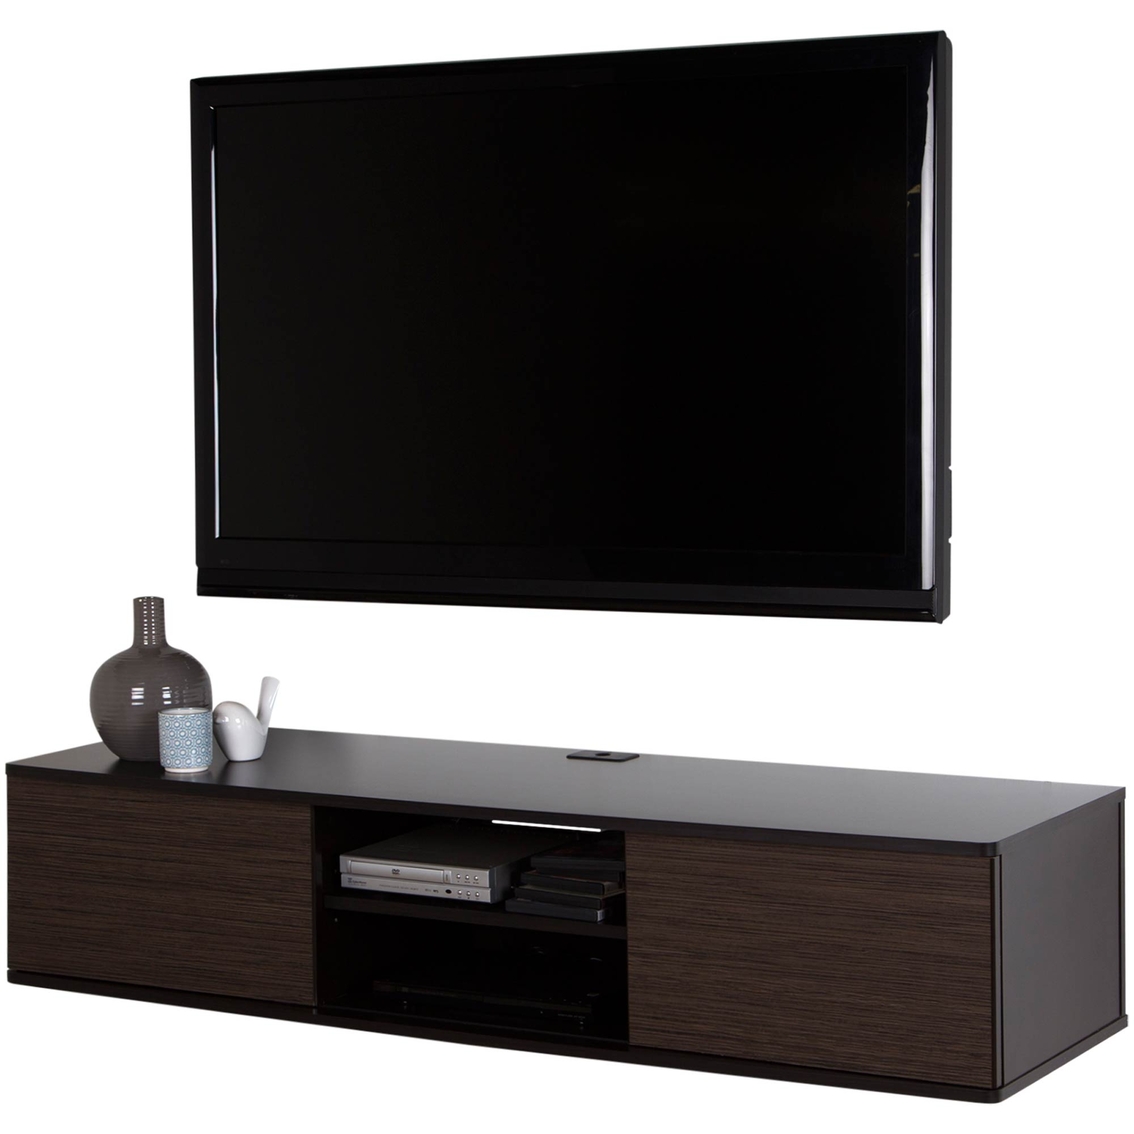 South Shore Agora 6 Compartment TV Stand - Image 2 of 4